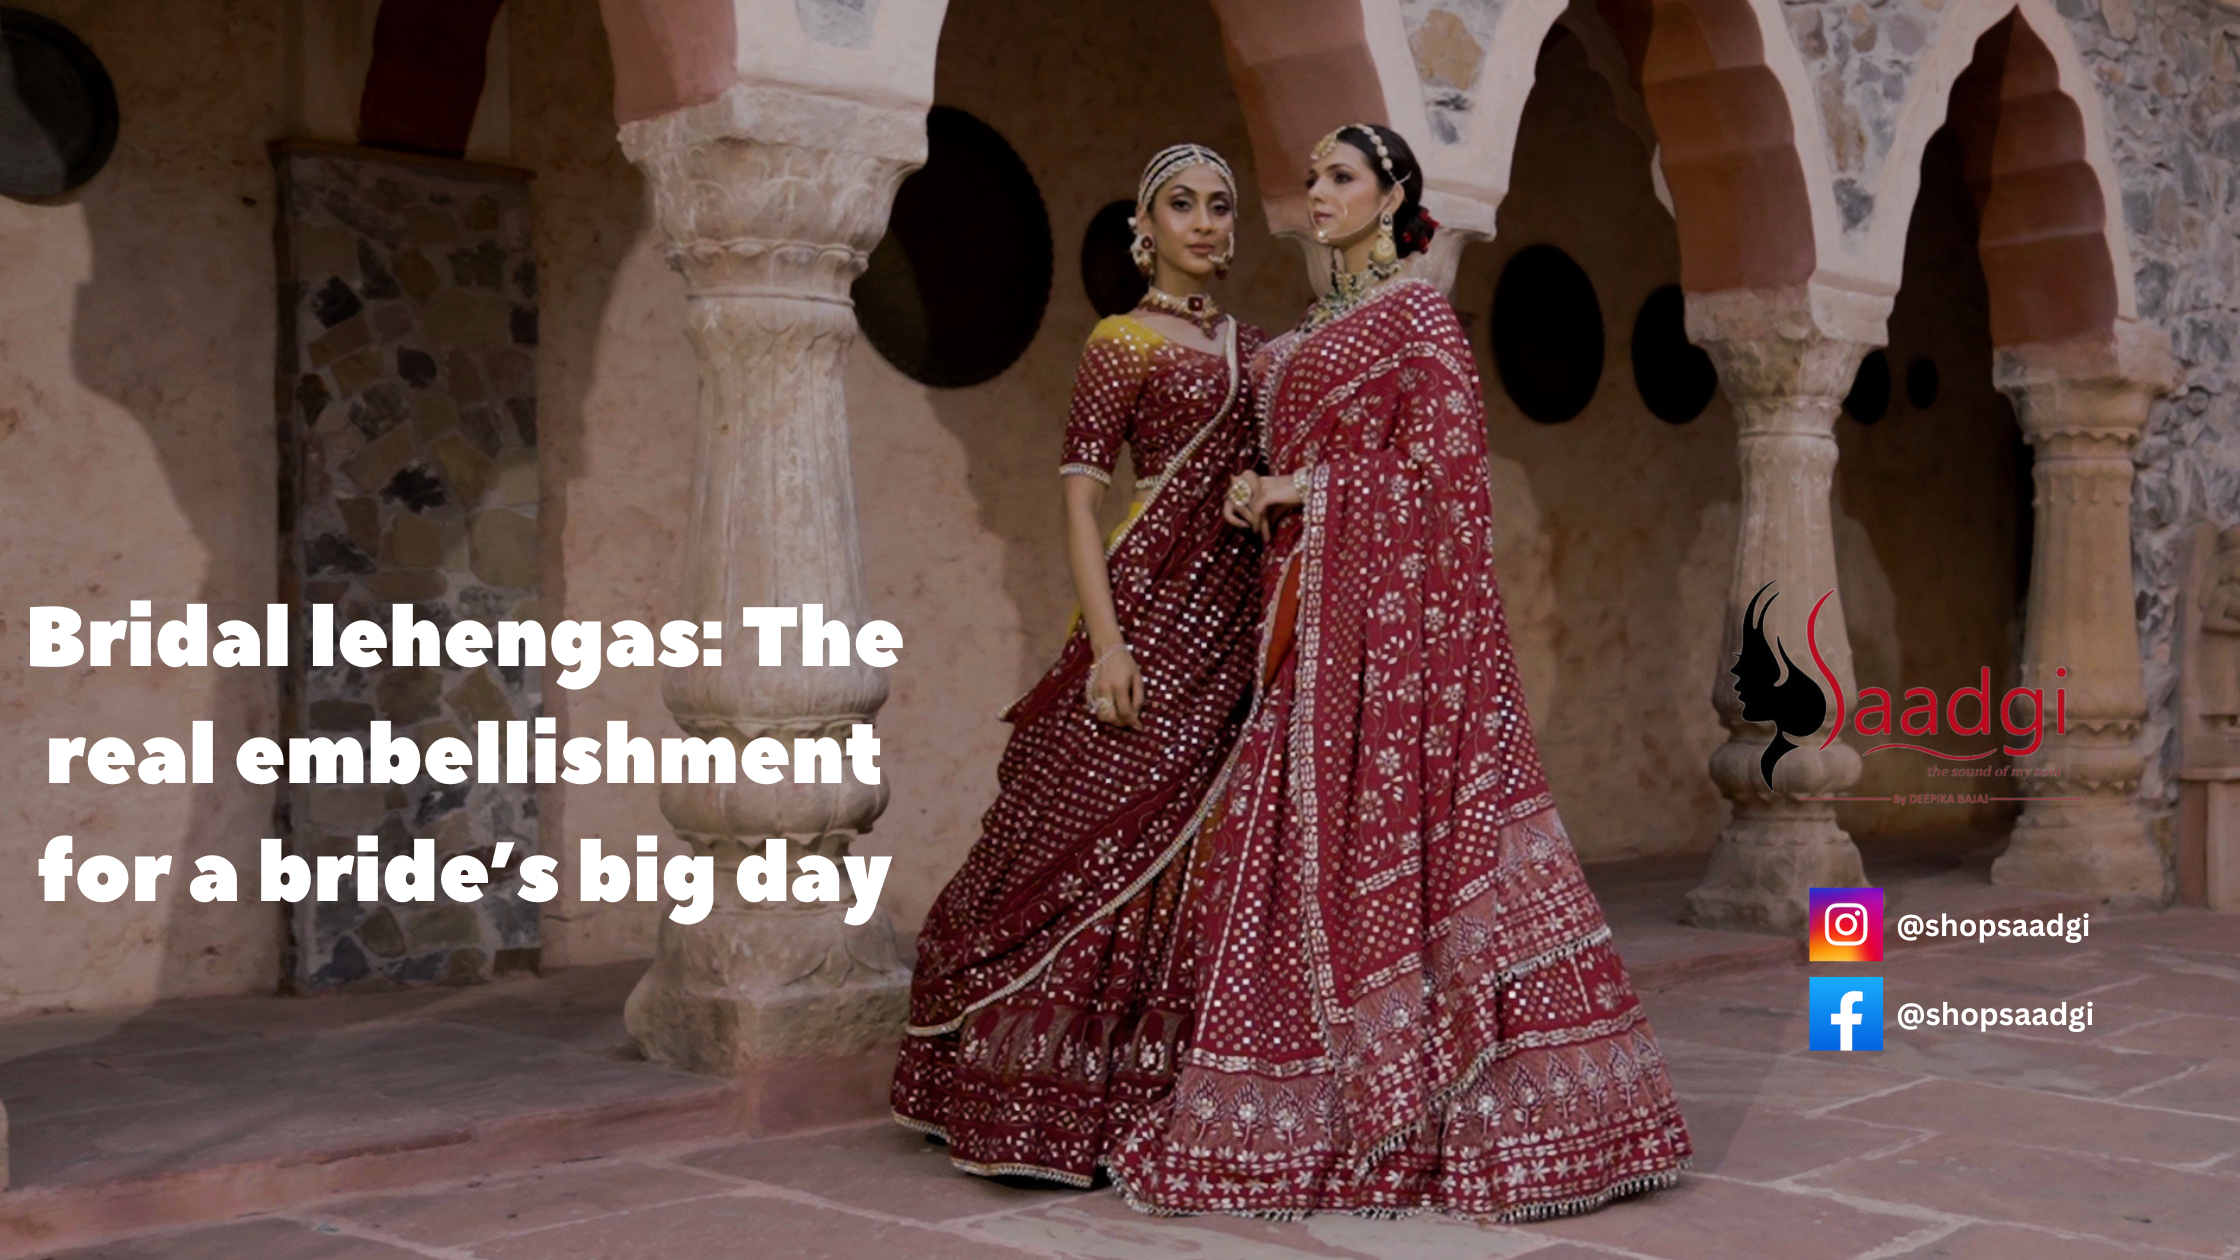 Bridal lehengas: The real embellishment for a bride’s big day